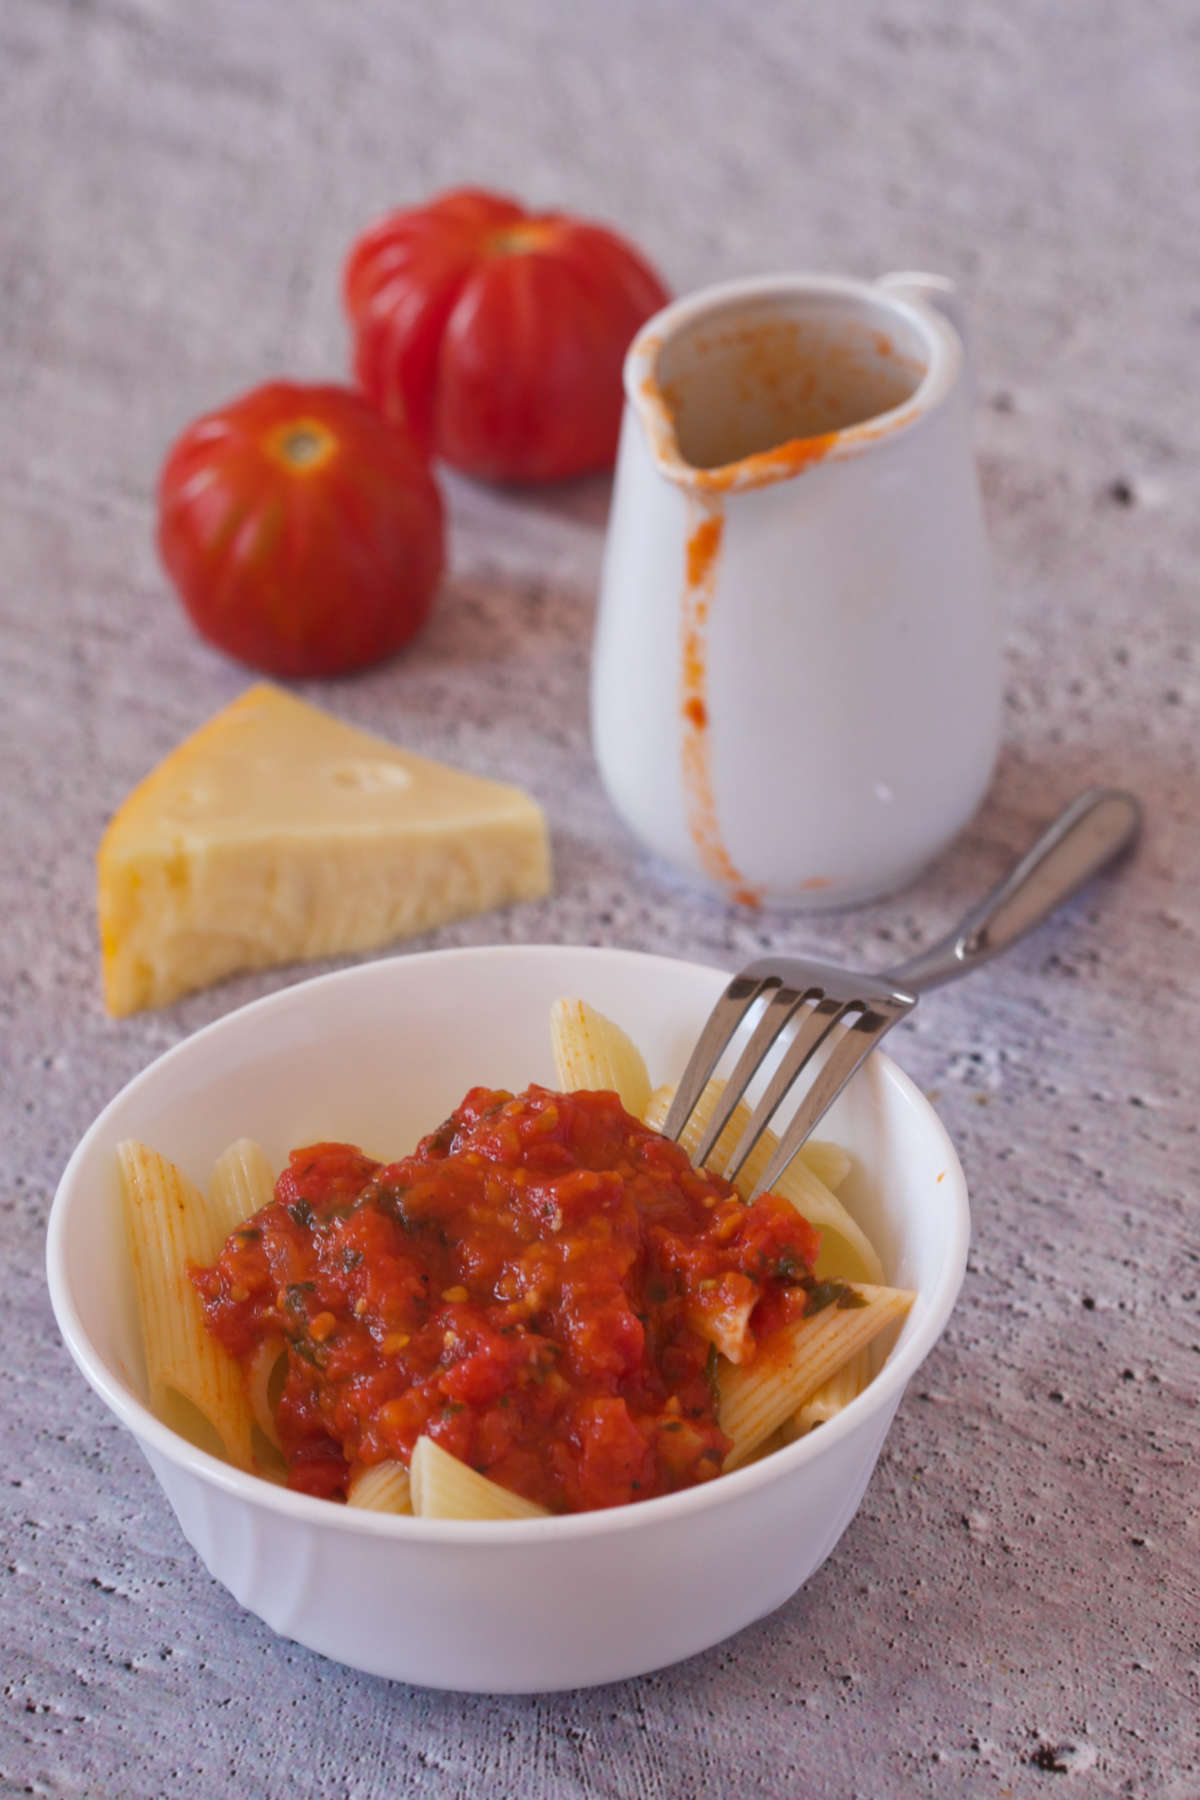 White bowl with pasta and tomato on a gray background together with two tomatoes cheese, fork and a pitcher with more tomato sauce.